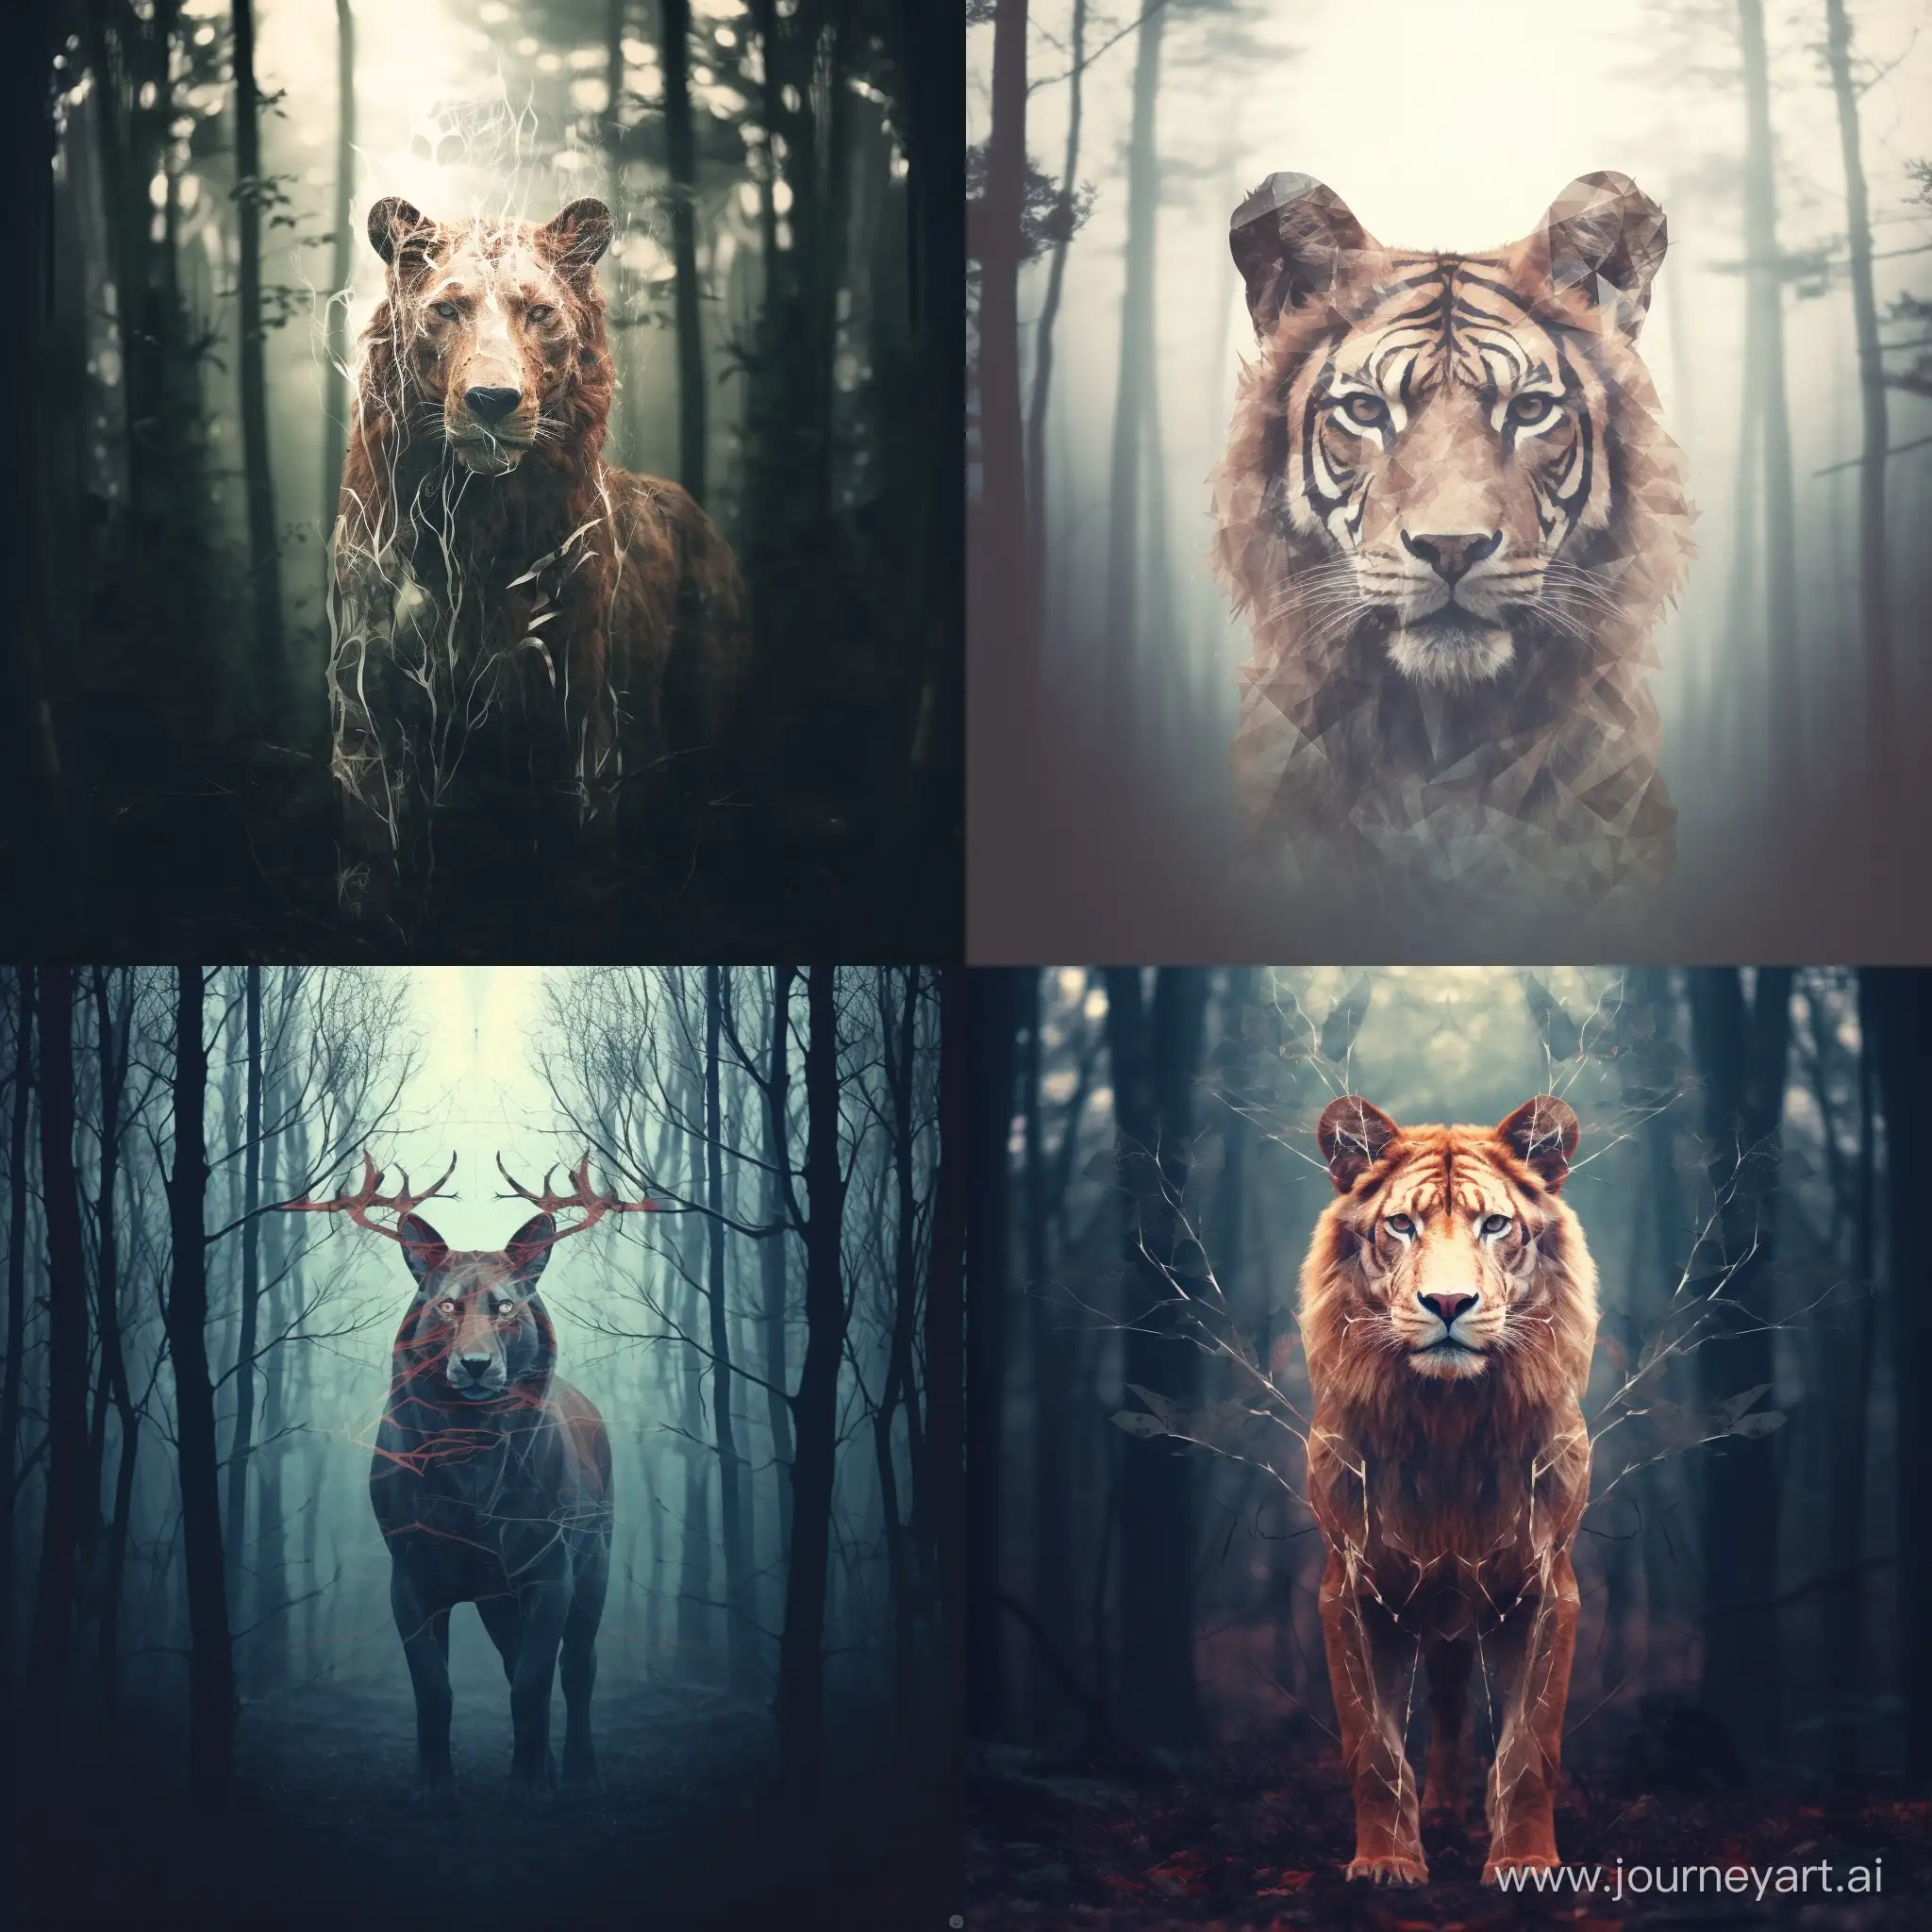 double exposure photography of a big tiger, inside the outline of tiger there is deer standing in forest.